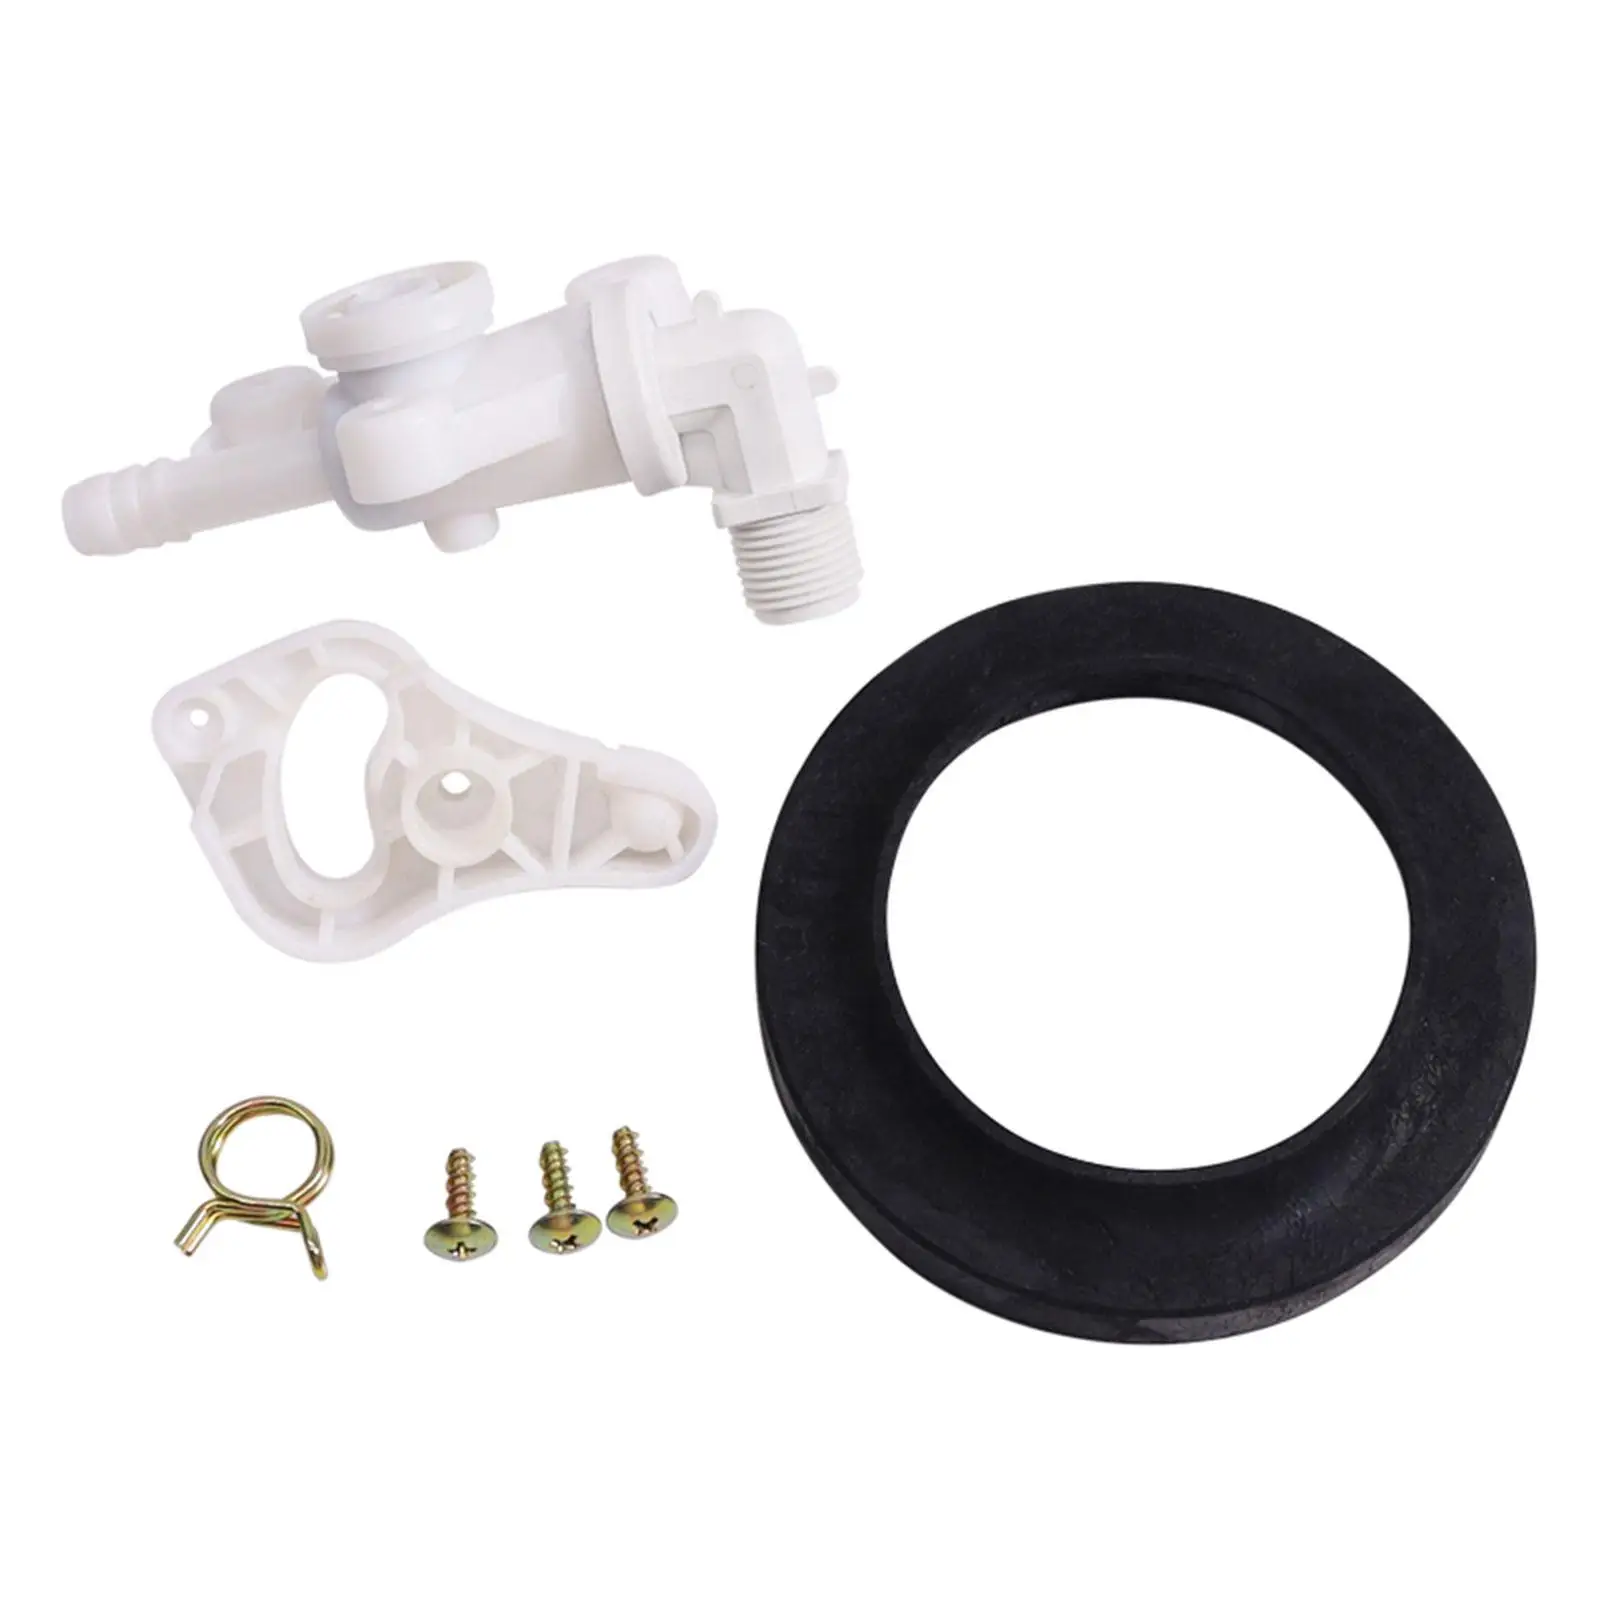 34100 RV Toilet Water Valve for Style Plus Toilets Accessory Replace Parts for Durable Practical Easy to Install Convenient